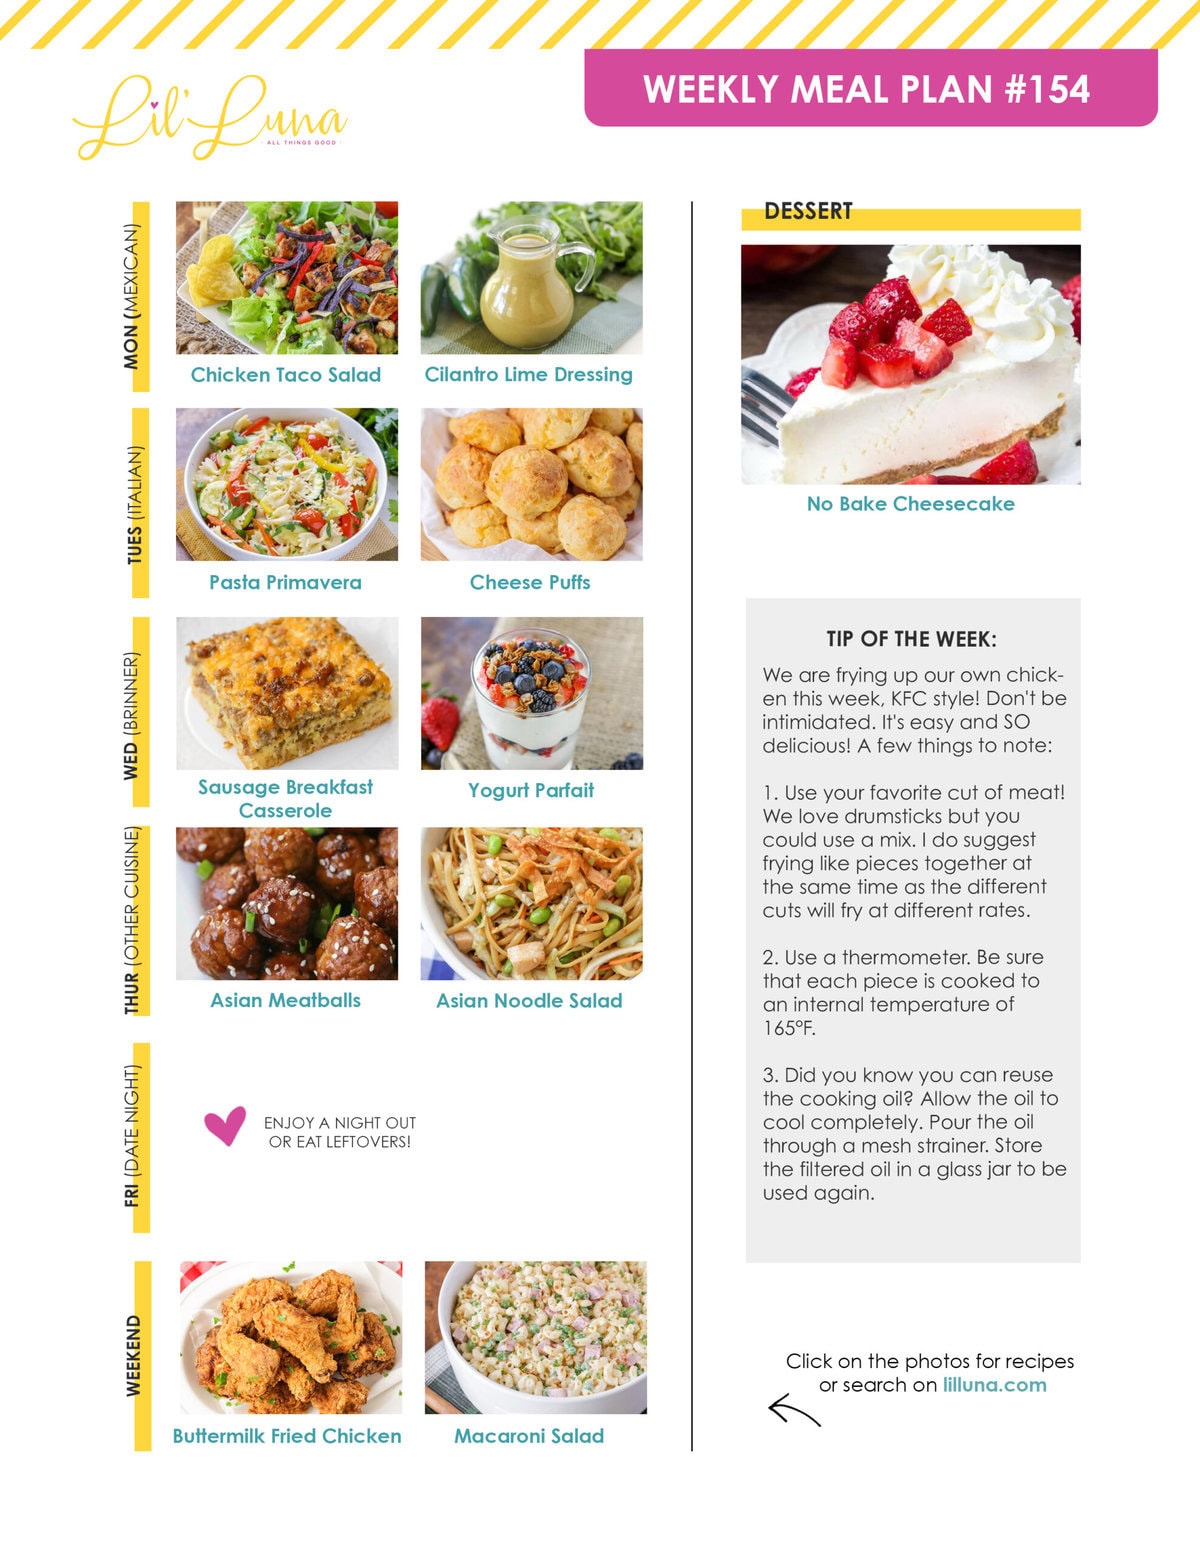 Meal plan 154 graphic.